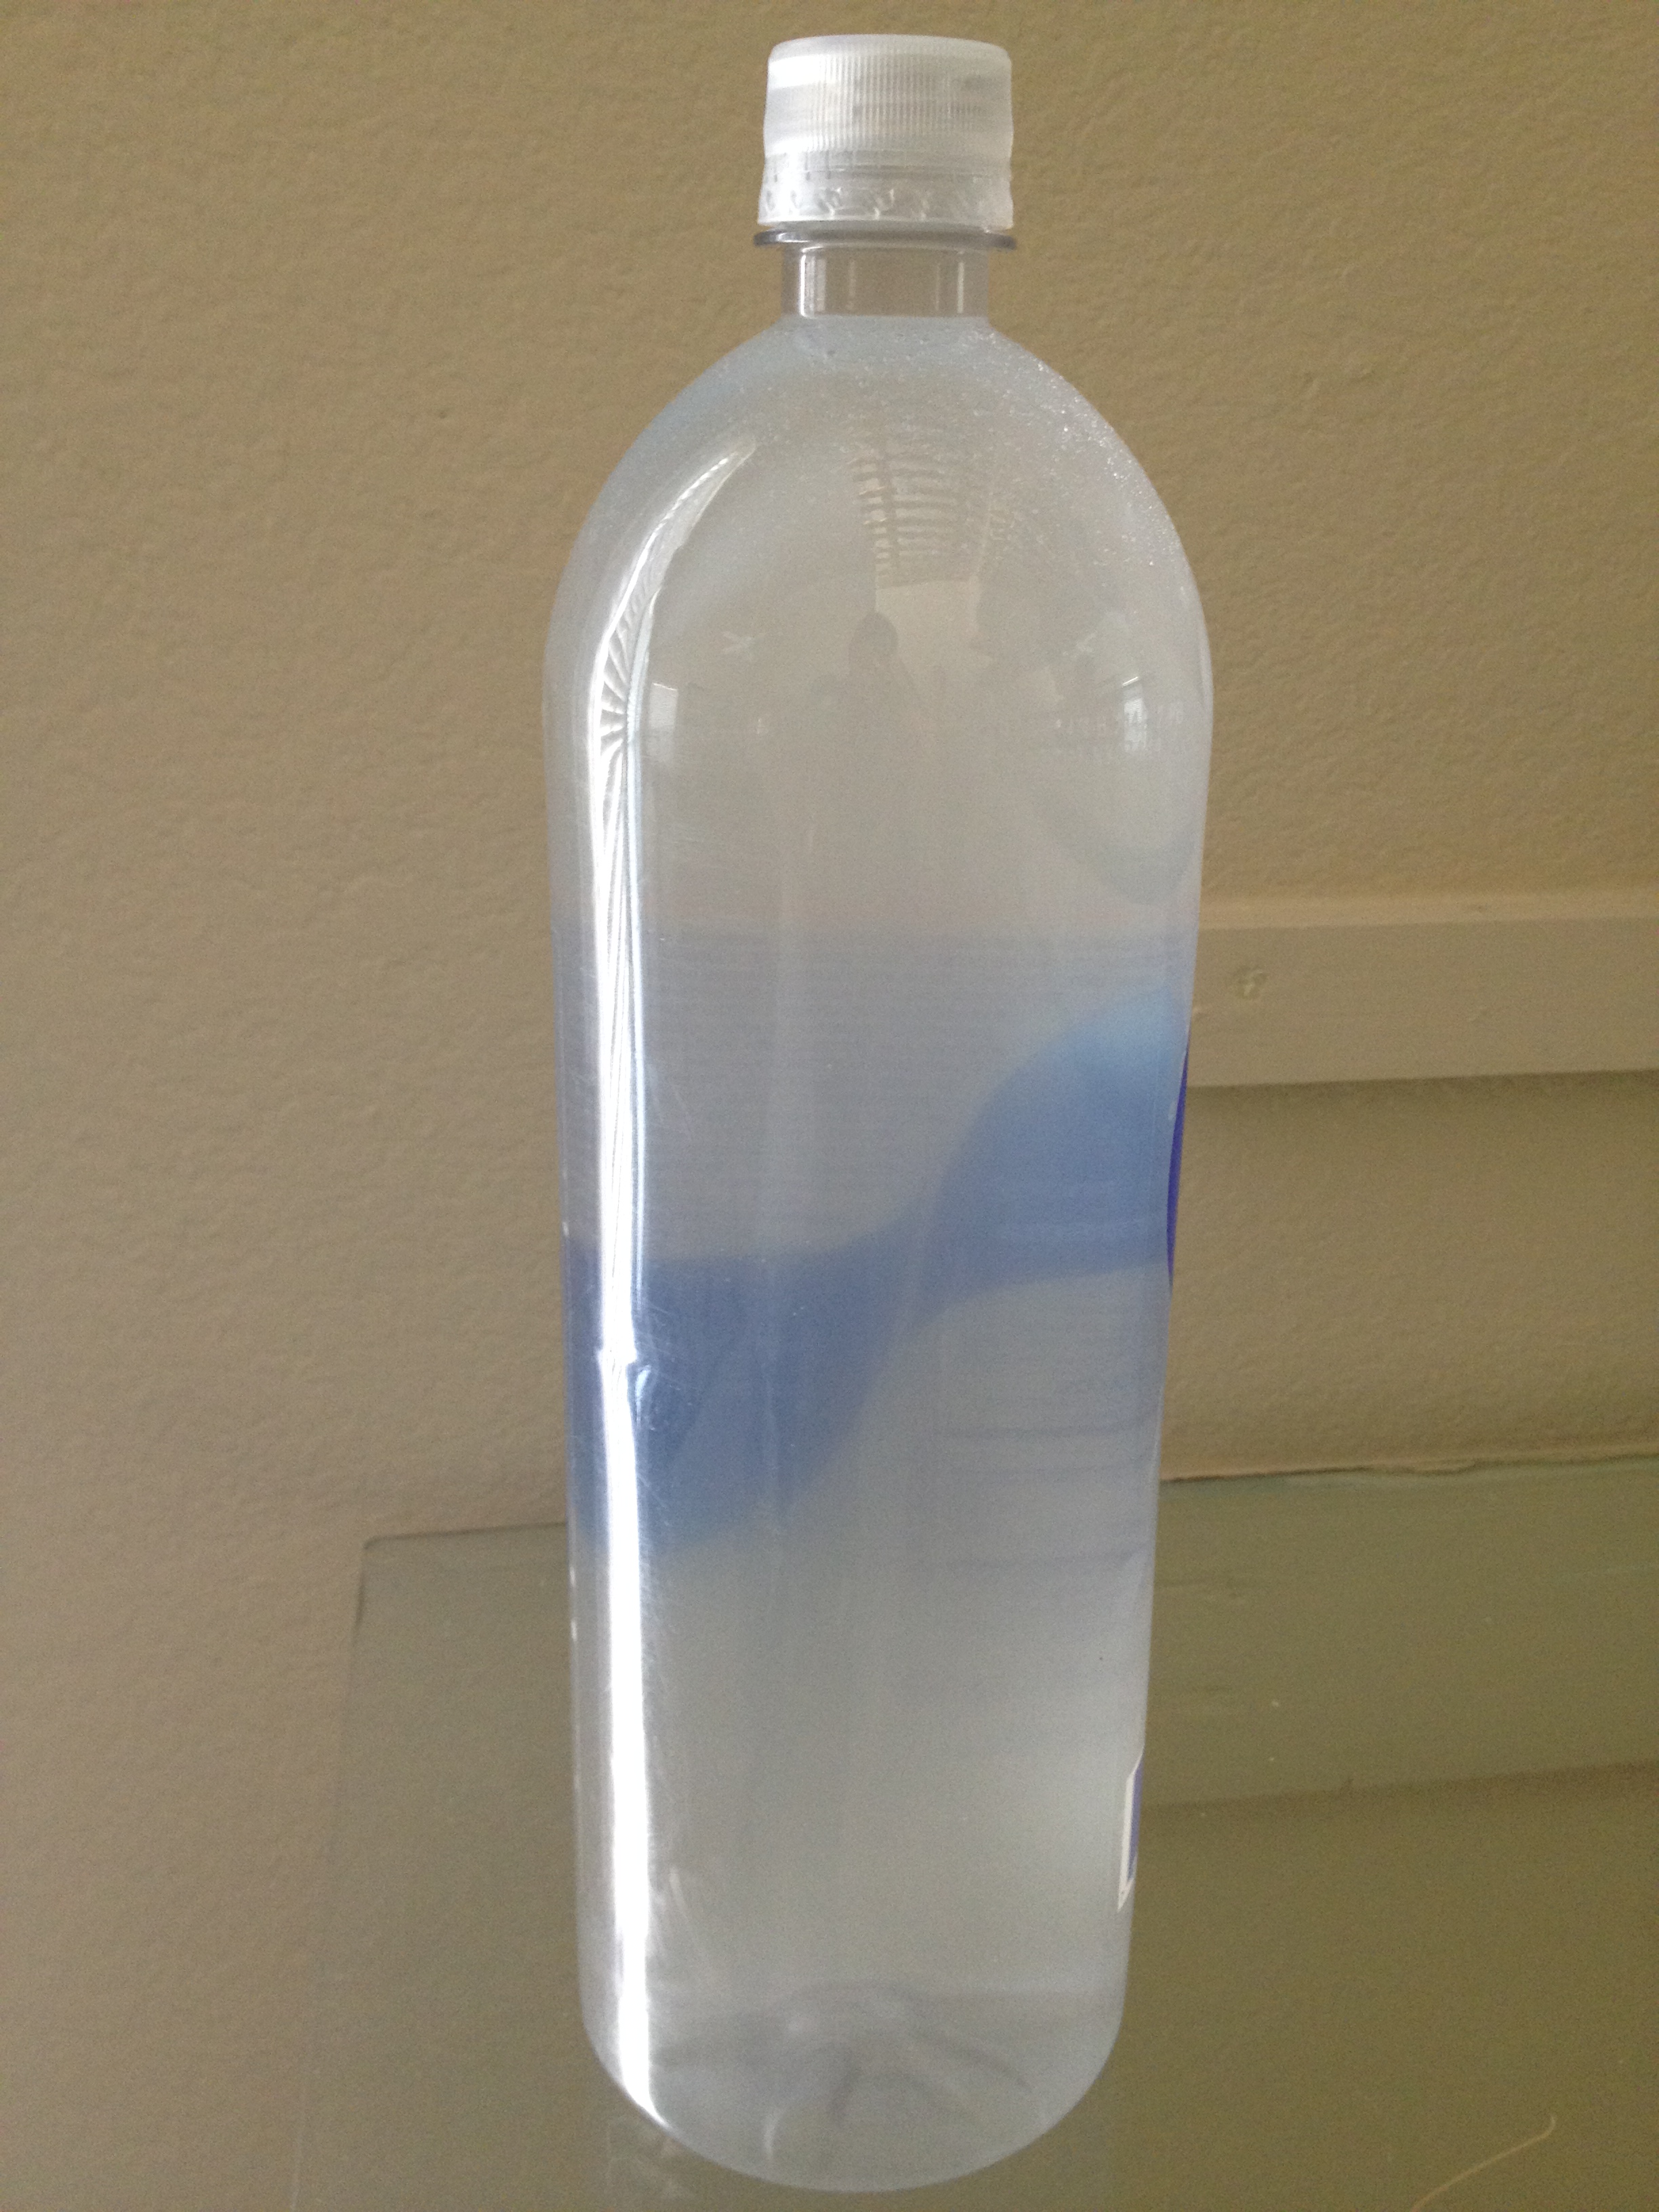 One of many reasons why our tap water looks cloudy ...